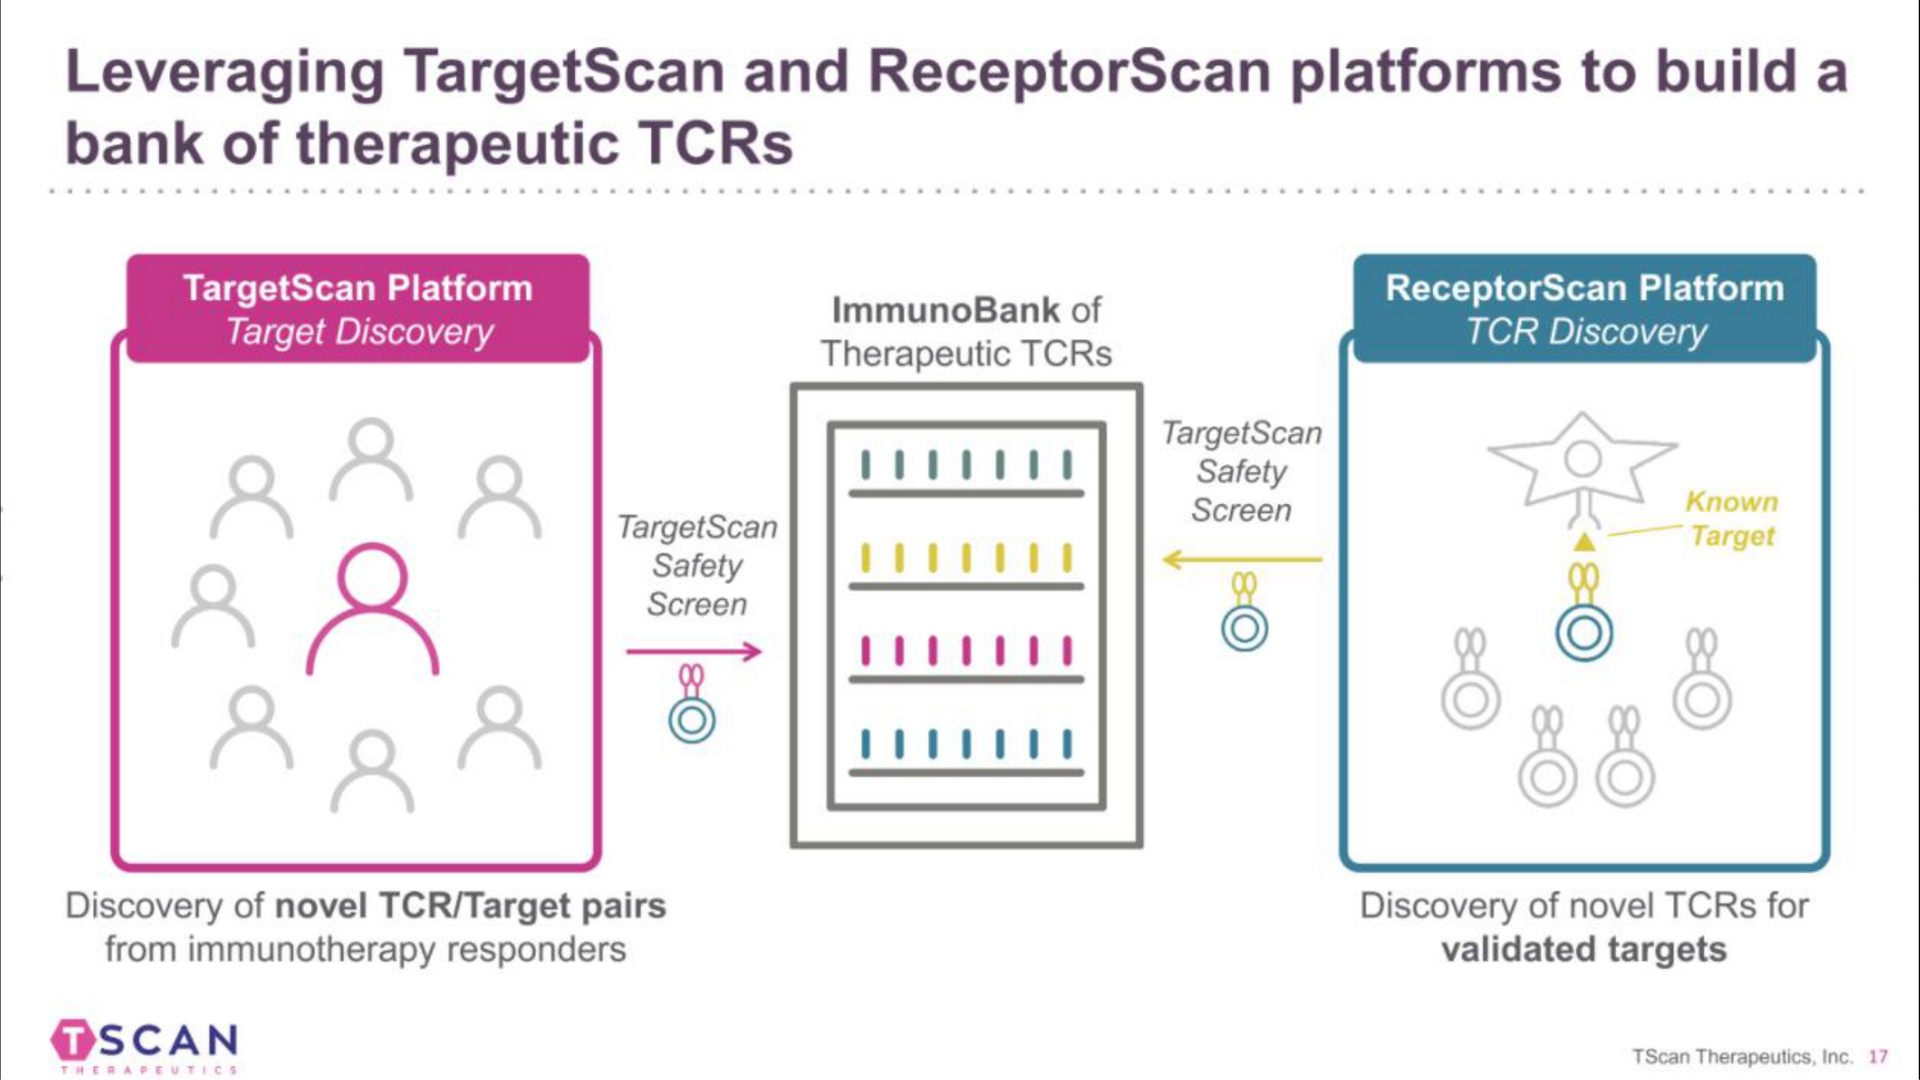 leveraging and platforms to build a bank of therapeutic | TScan Therapeutics